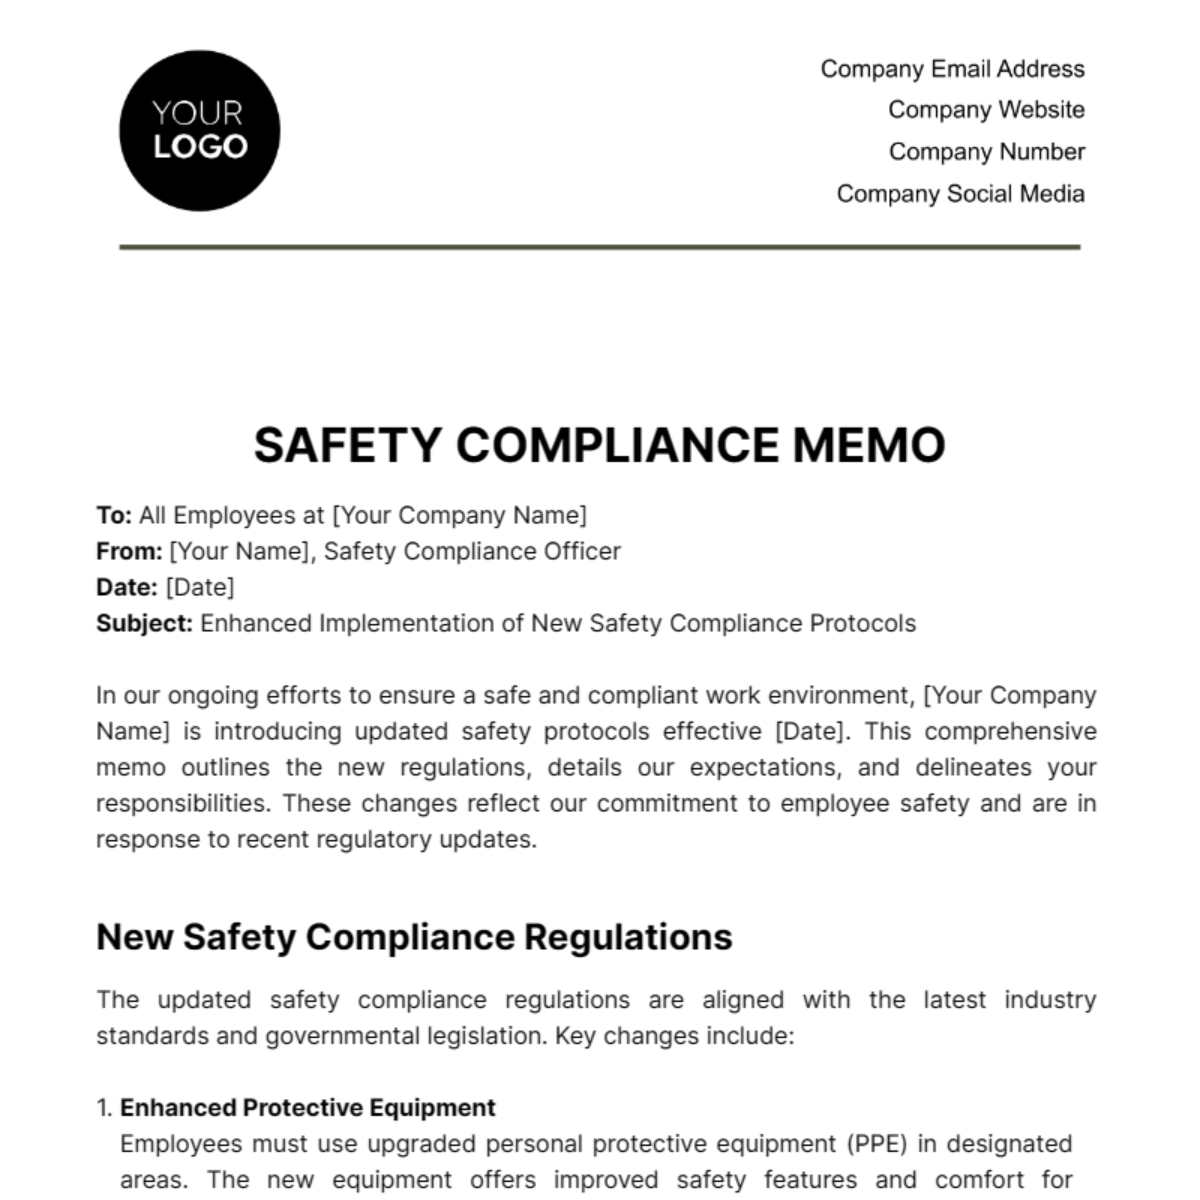 Safety Compliance Memo Template